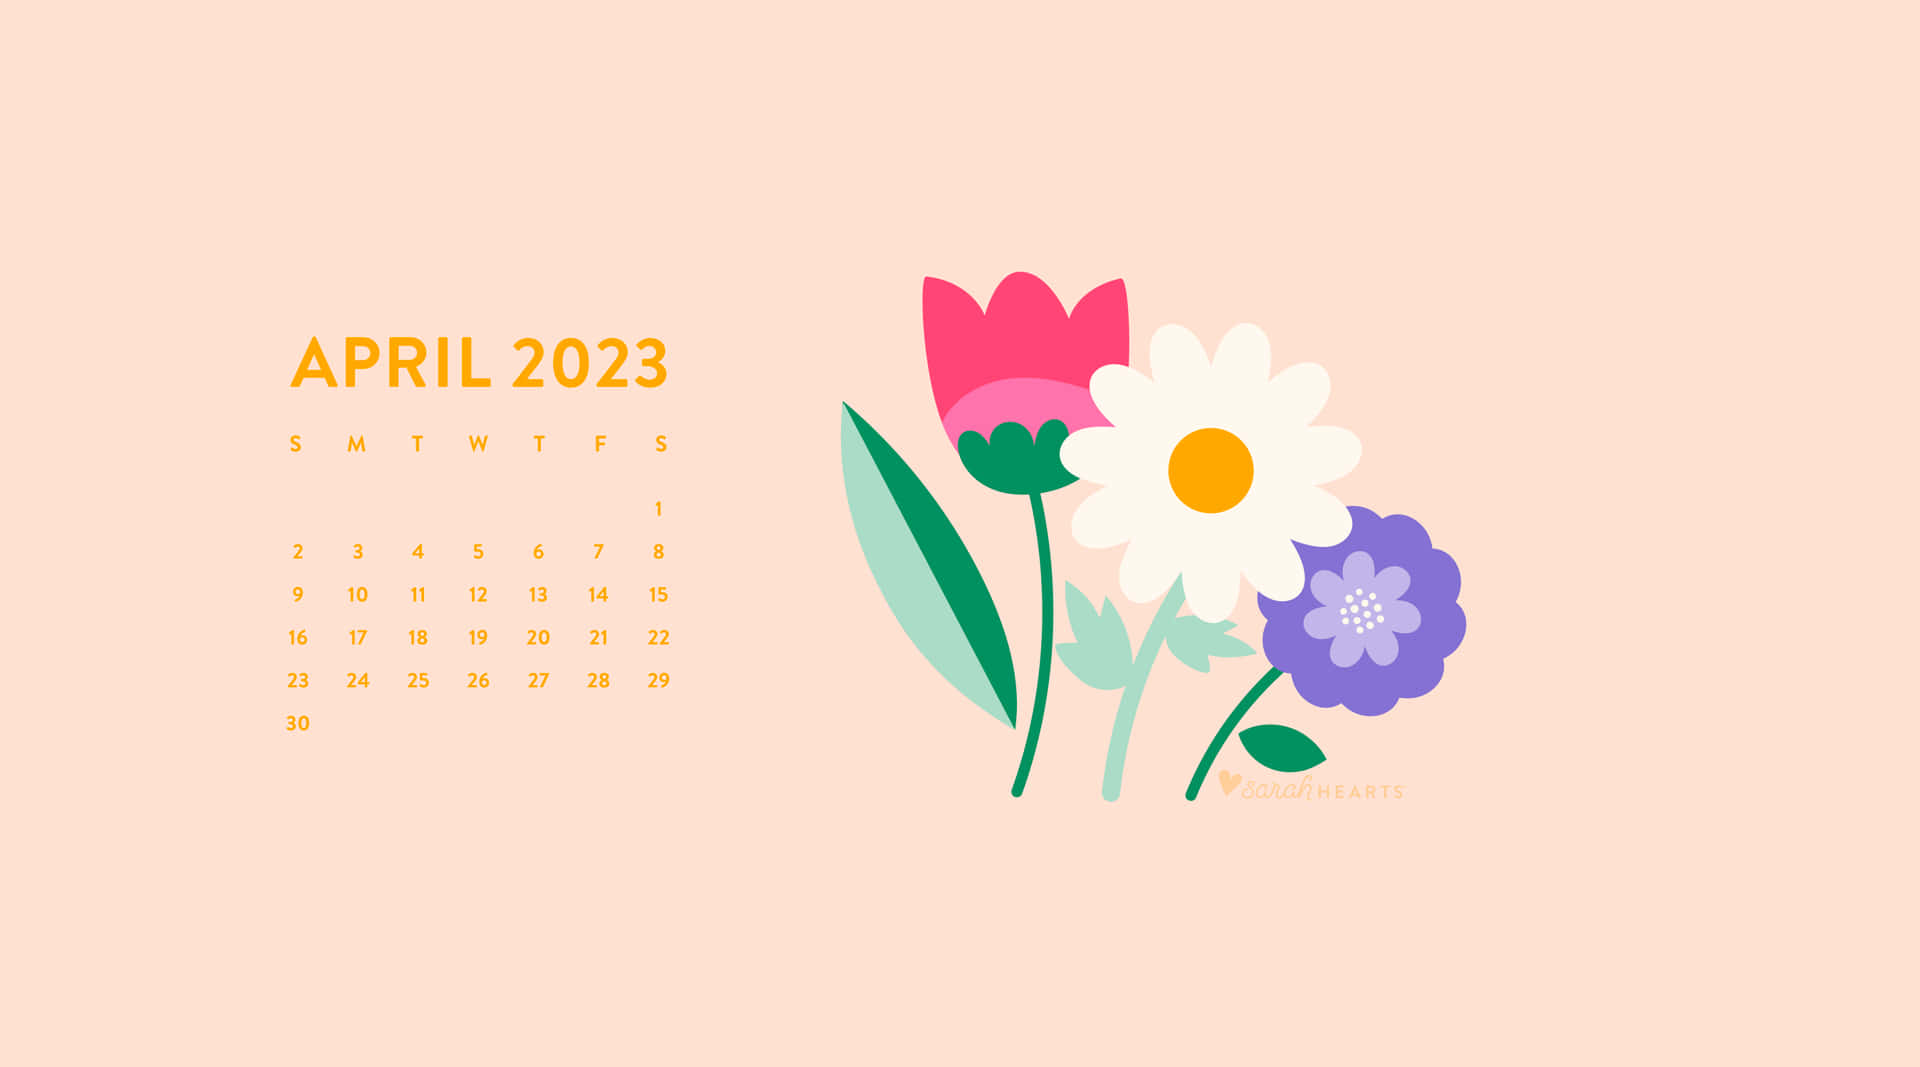 "Celebrate the New Month with This April Wallpaper"